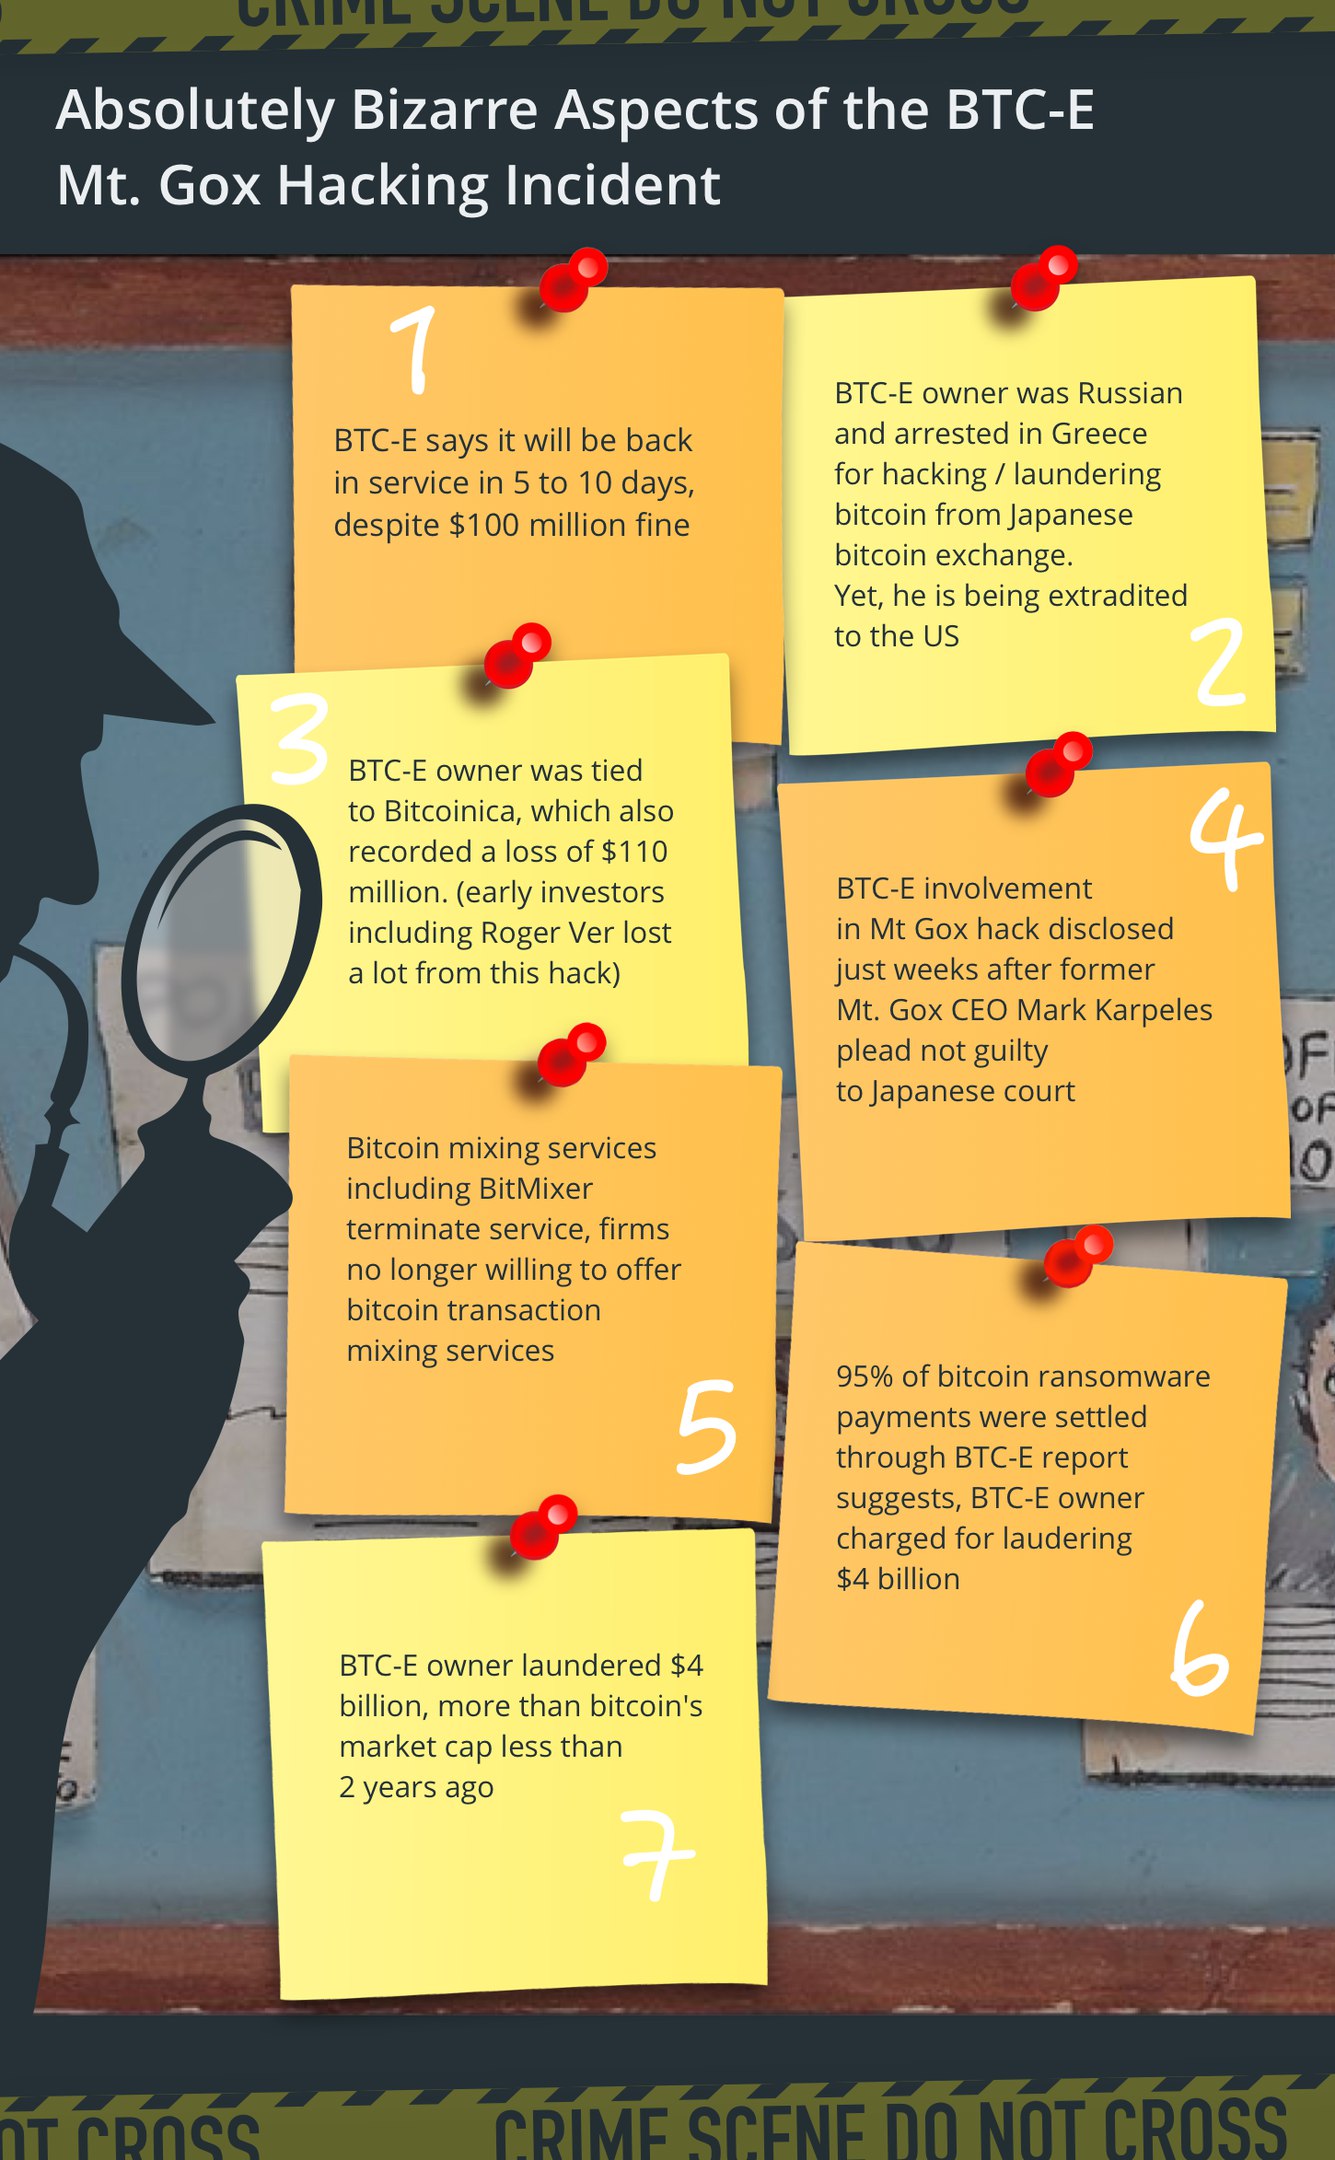 Absolutely Bizarre Aspects of the BTC-E Mt. Gox Hacking Incident